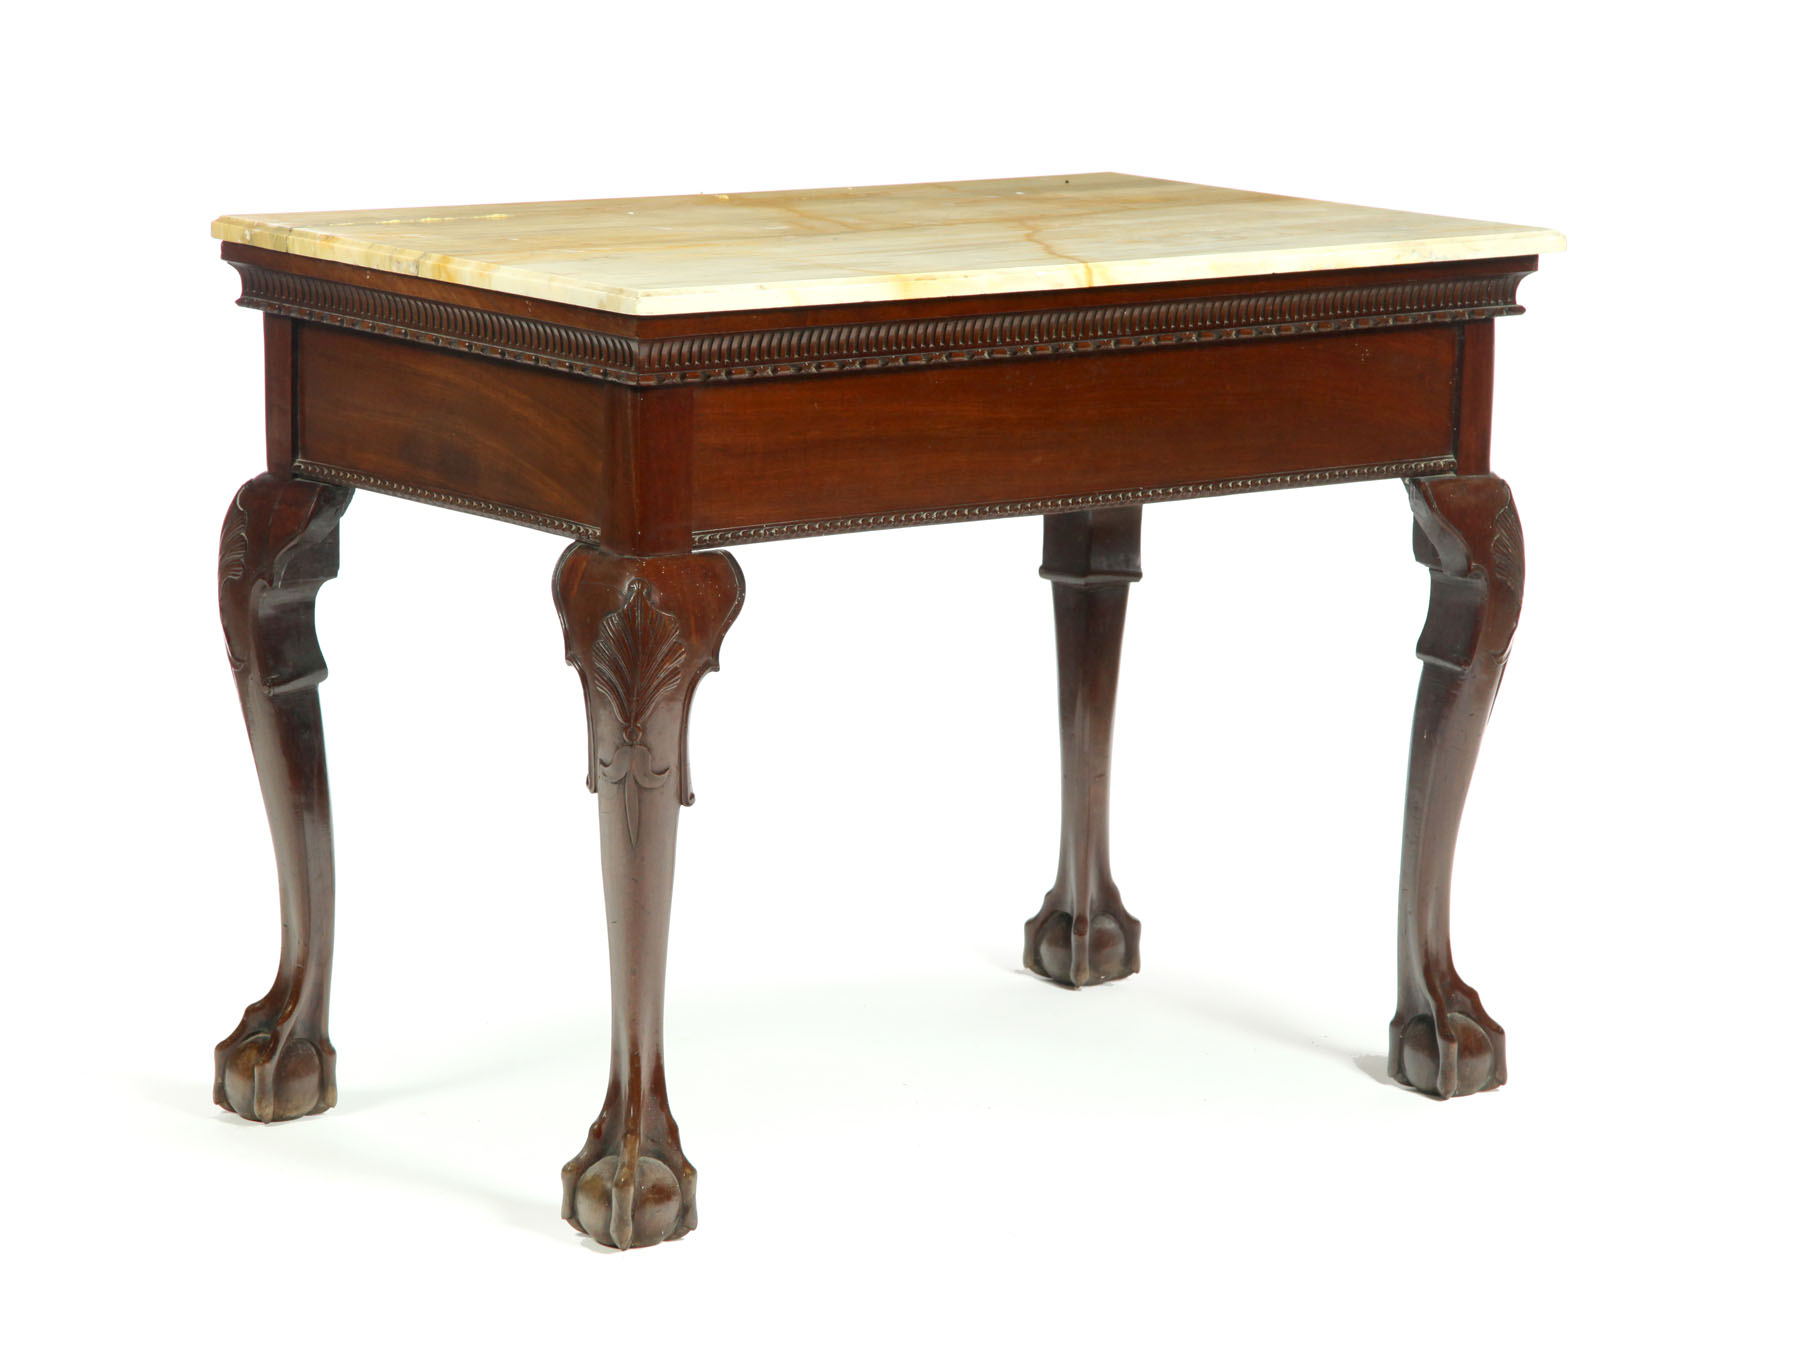 GEORGIAN-STYLE SERVING TABLE. 